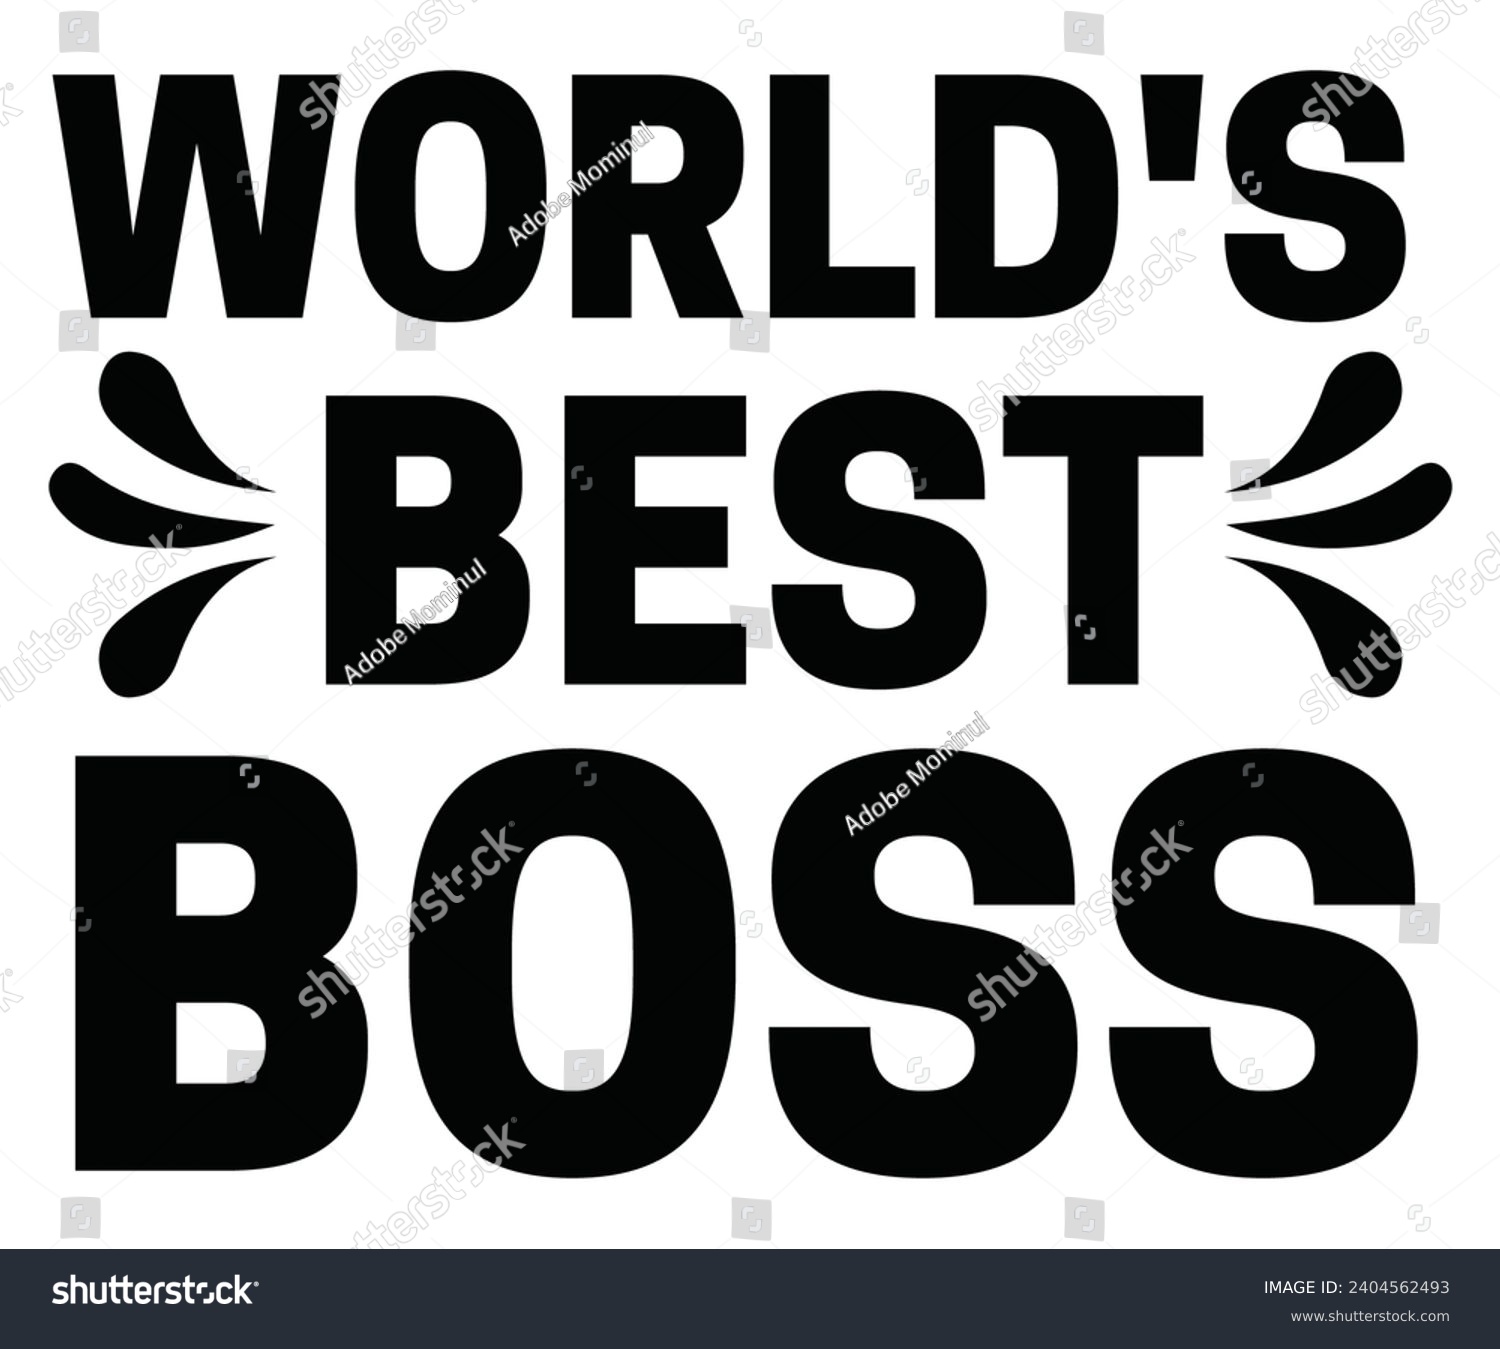 SVG of World's Best Boss Svg,Happy Boss Day svg,Boss Saying Quotes,Boss Day T-shirt,Gift for Boss,Great Jobs,Happy Bosses Day t-shirt,Girl Boss Shirt,Motivational Boss,Cut File,Circut And Silhouette, svg